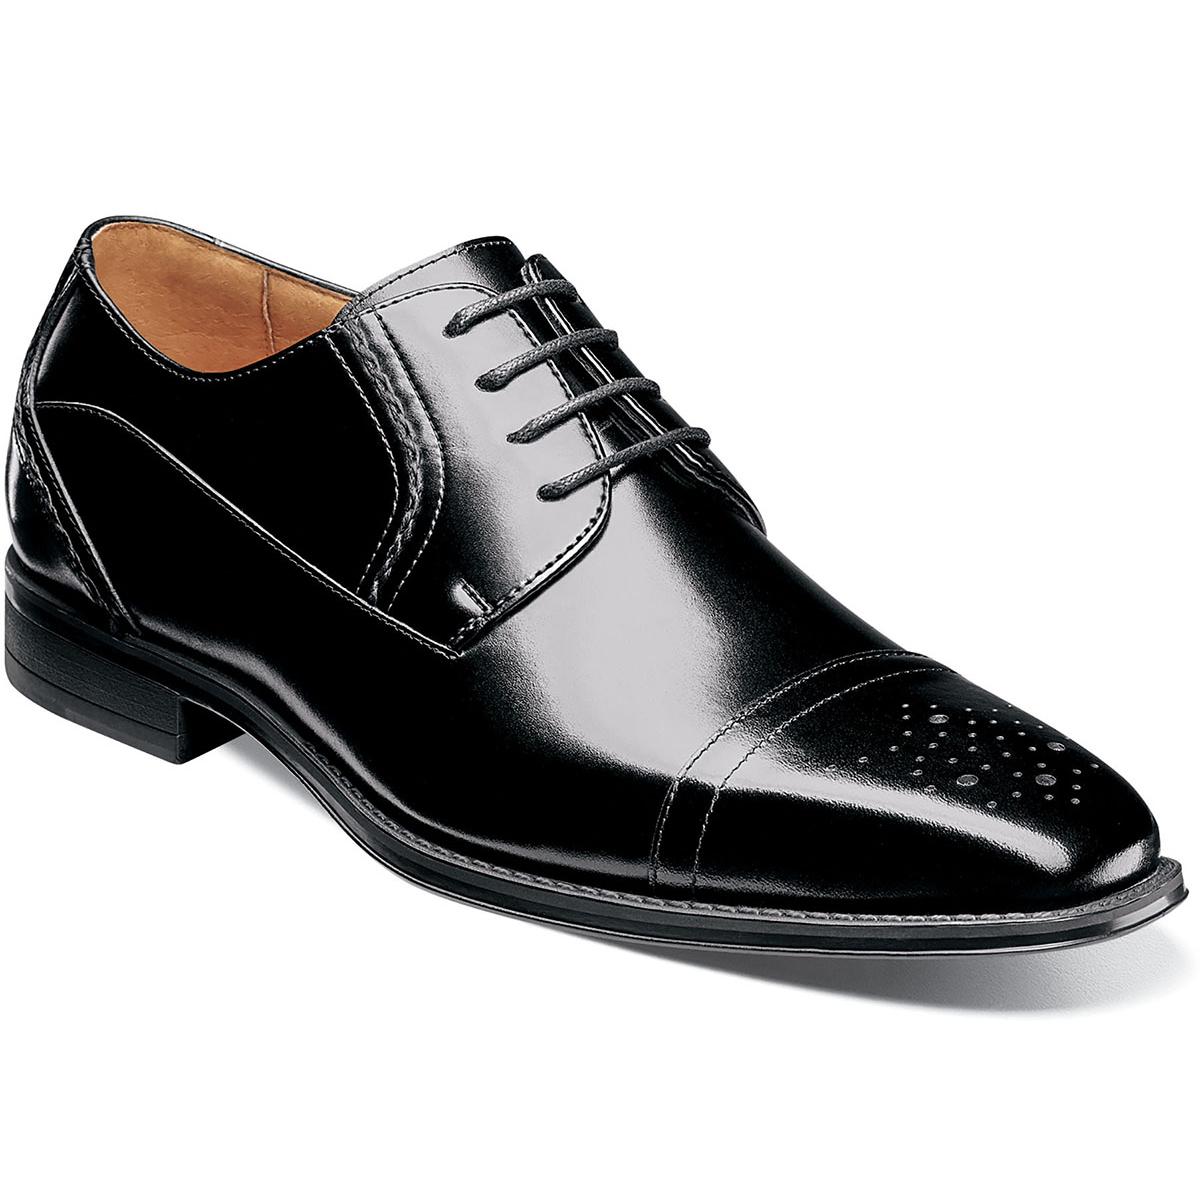 Stacy Adams Powell Black Genuine Leather Cap Toe Oxford Shoes 25246-001 ...